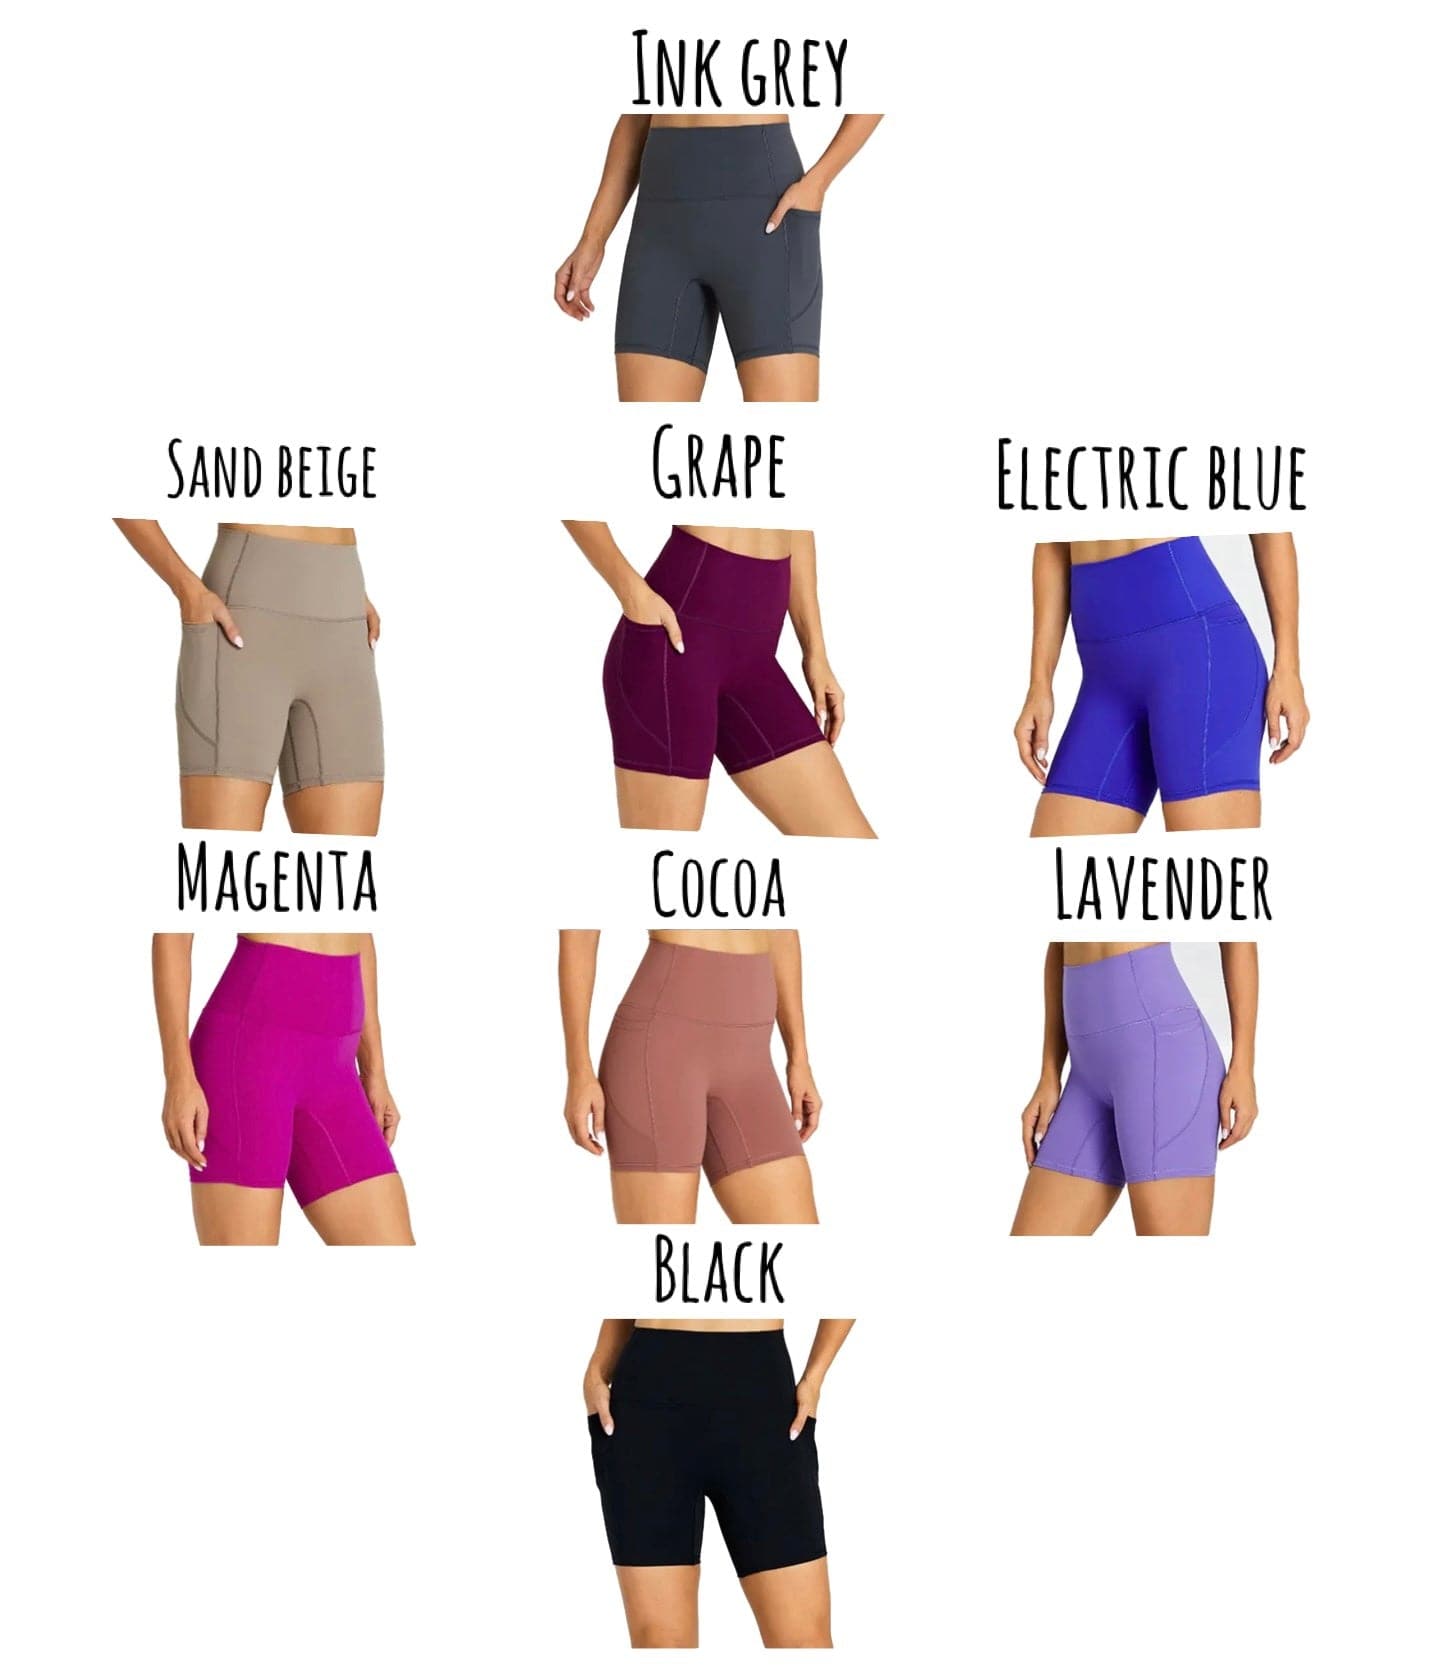 [BUNDLE DEAL BUY 4 FOR 15% OFF] Energy seamless pocket shorts (6 inch inseam)